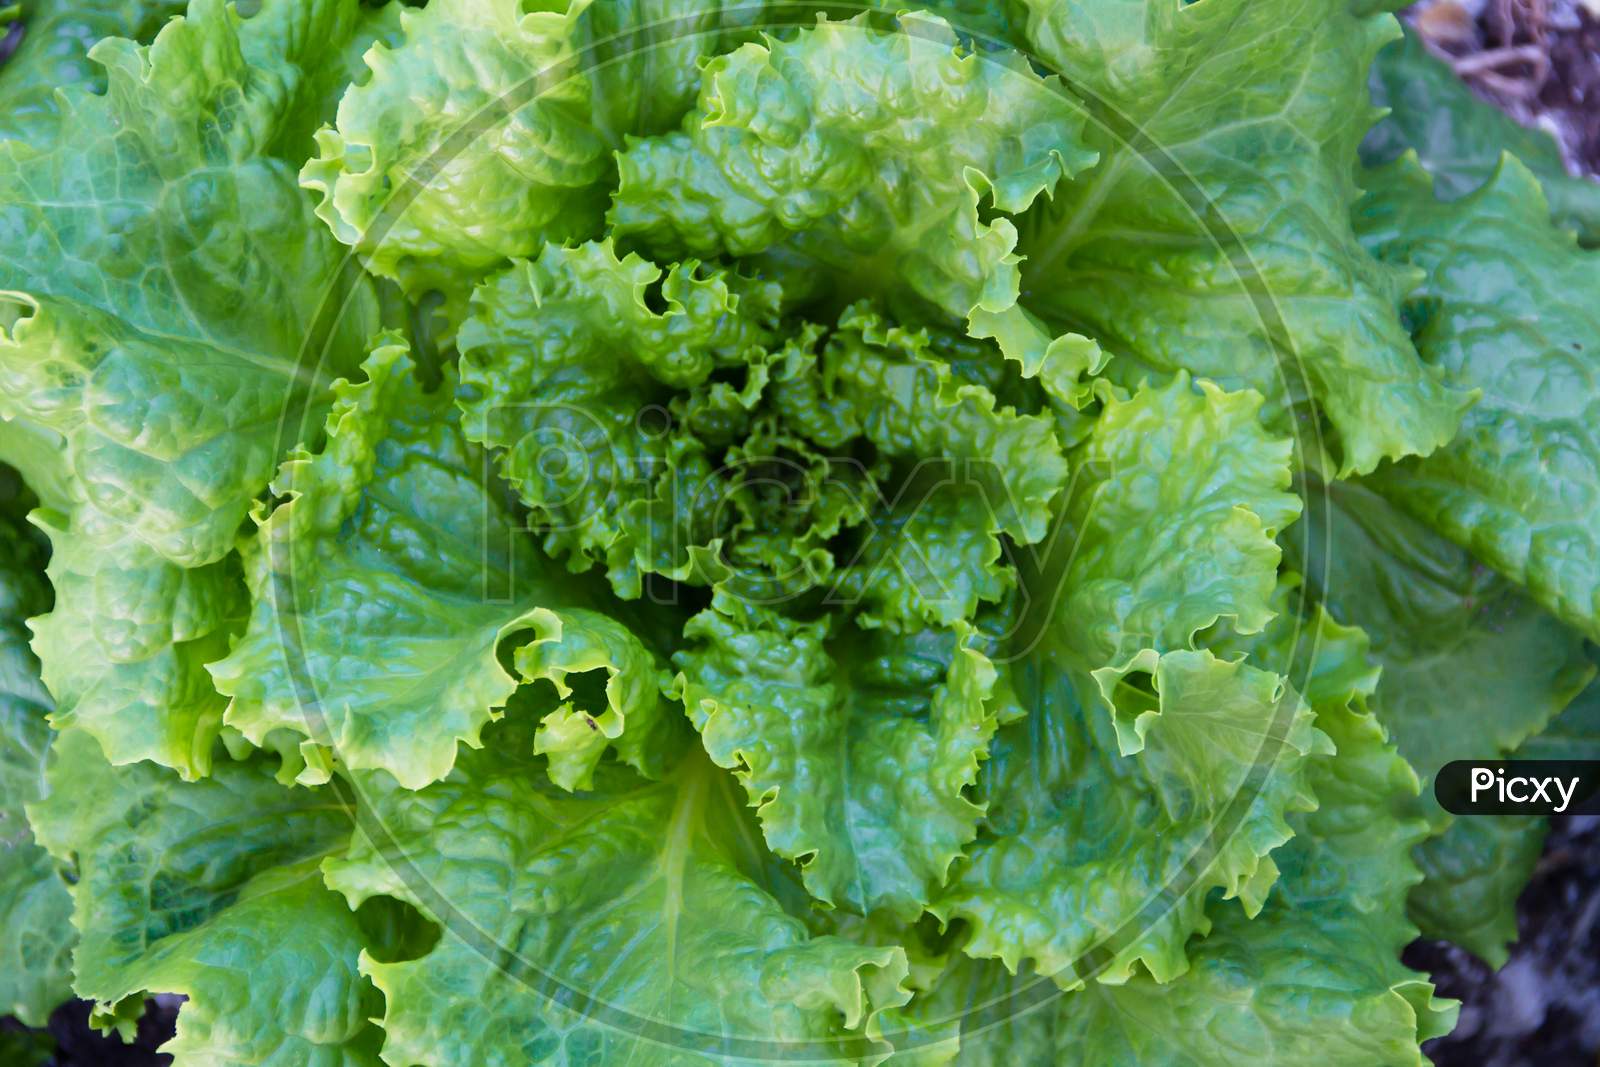 Green And Purple Curly Lettuce Leaves In The Organic Garden